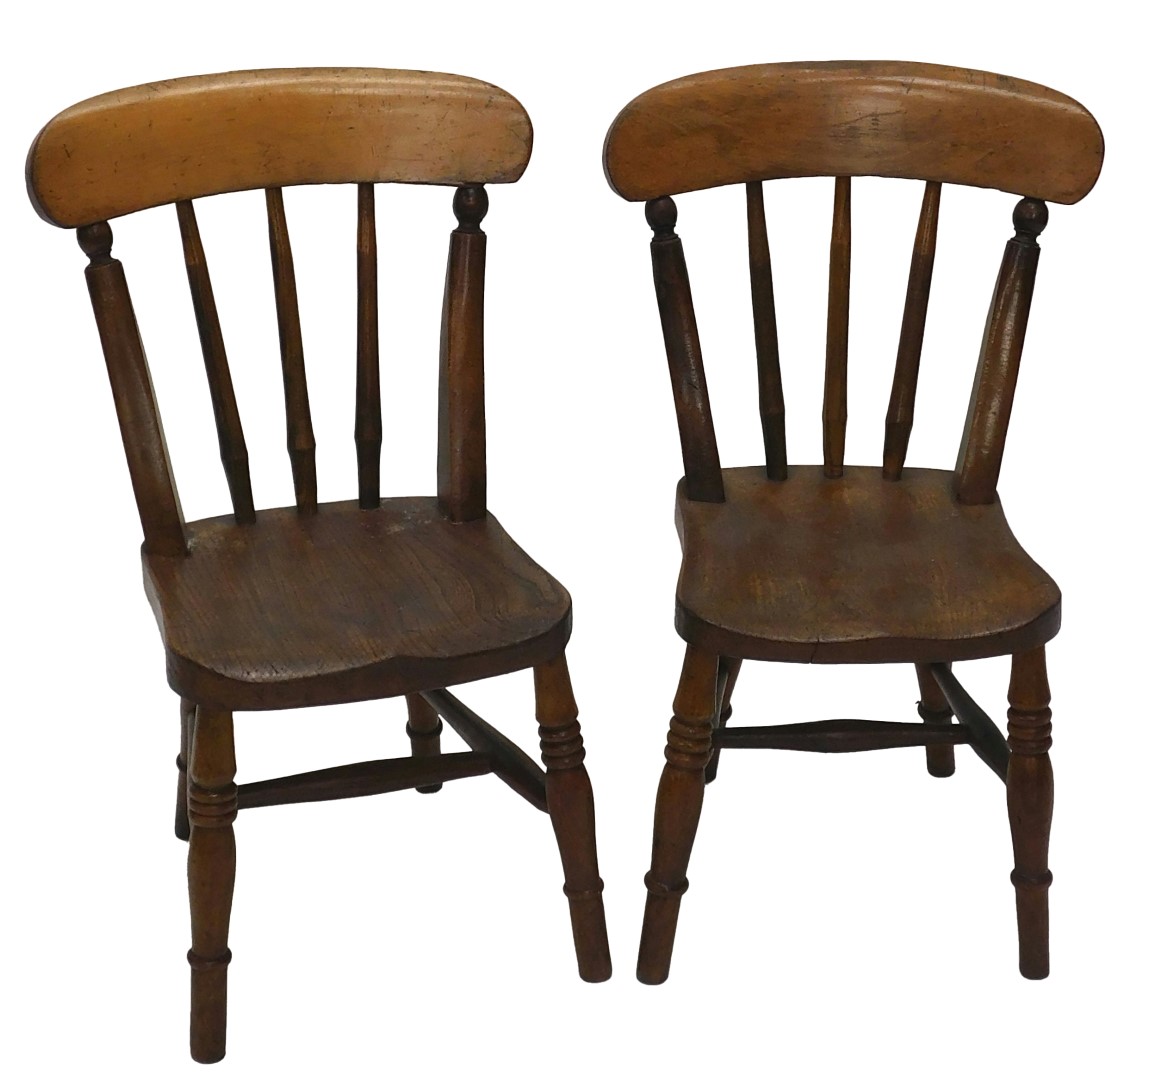 Two 19thC ash and elm child's chairs, each with a turned seat on H stretcher.